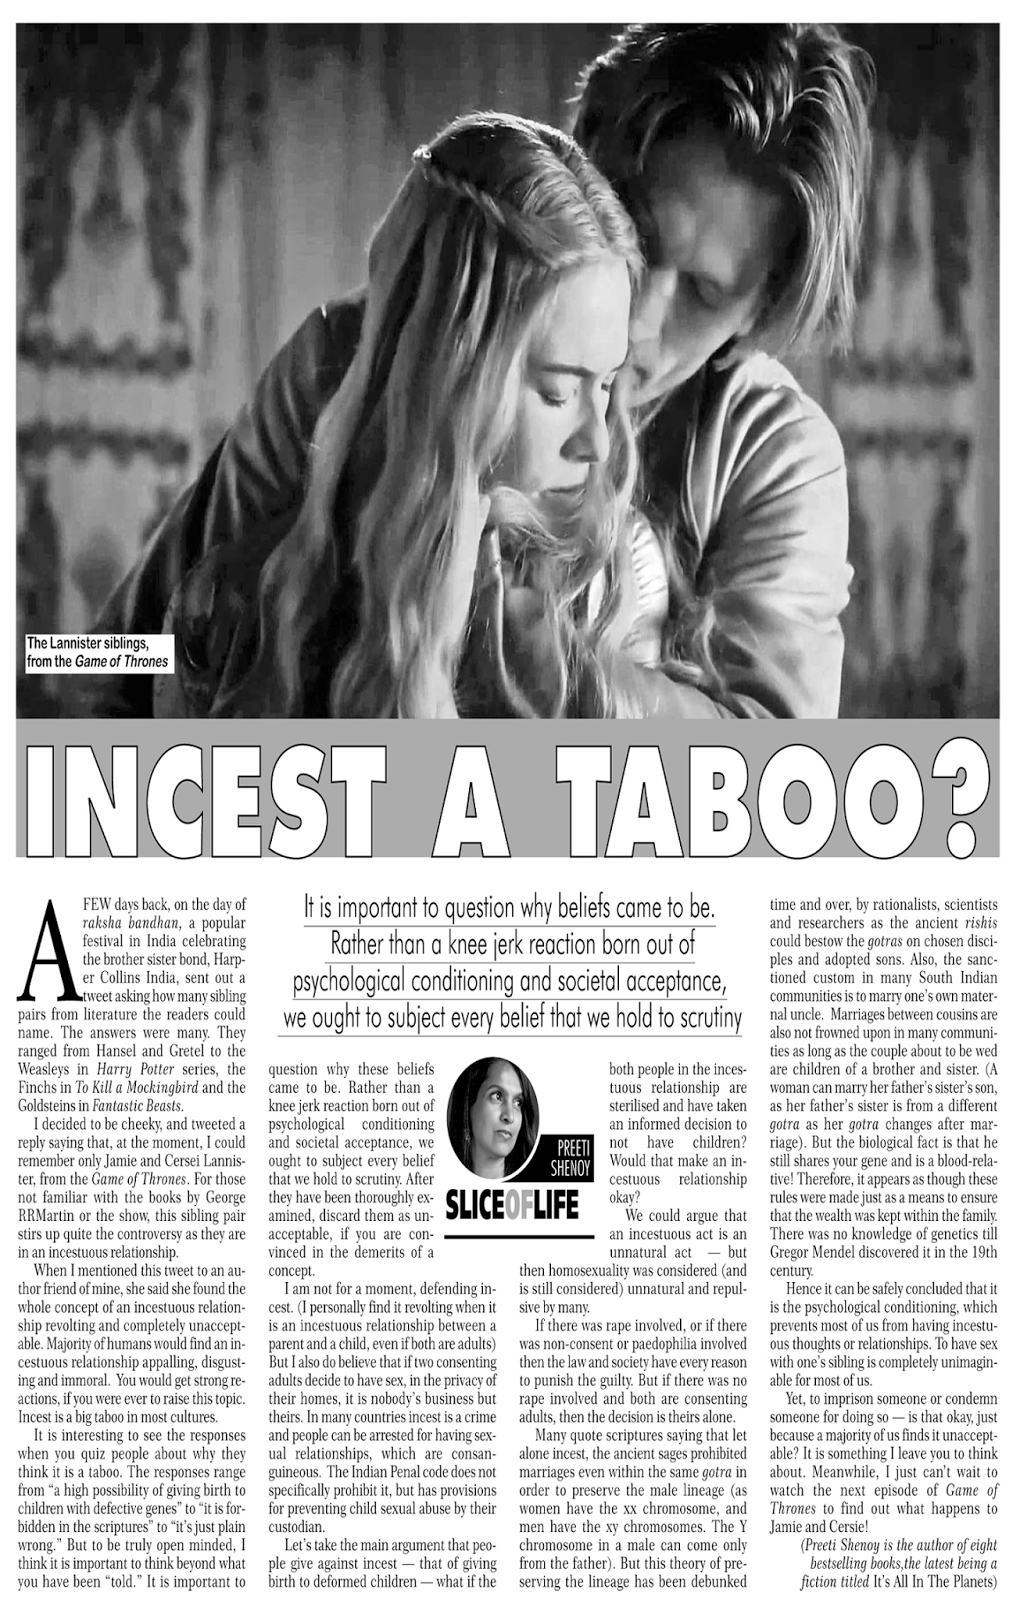 Incest-- a taboo pic